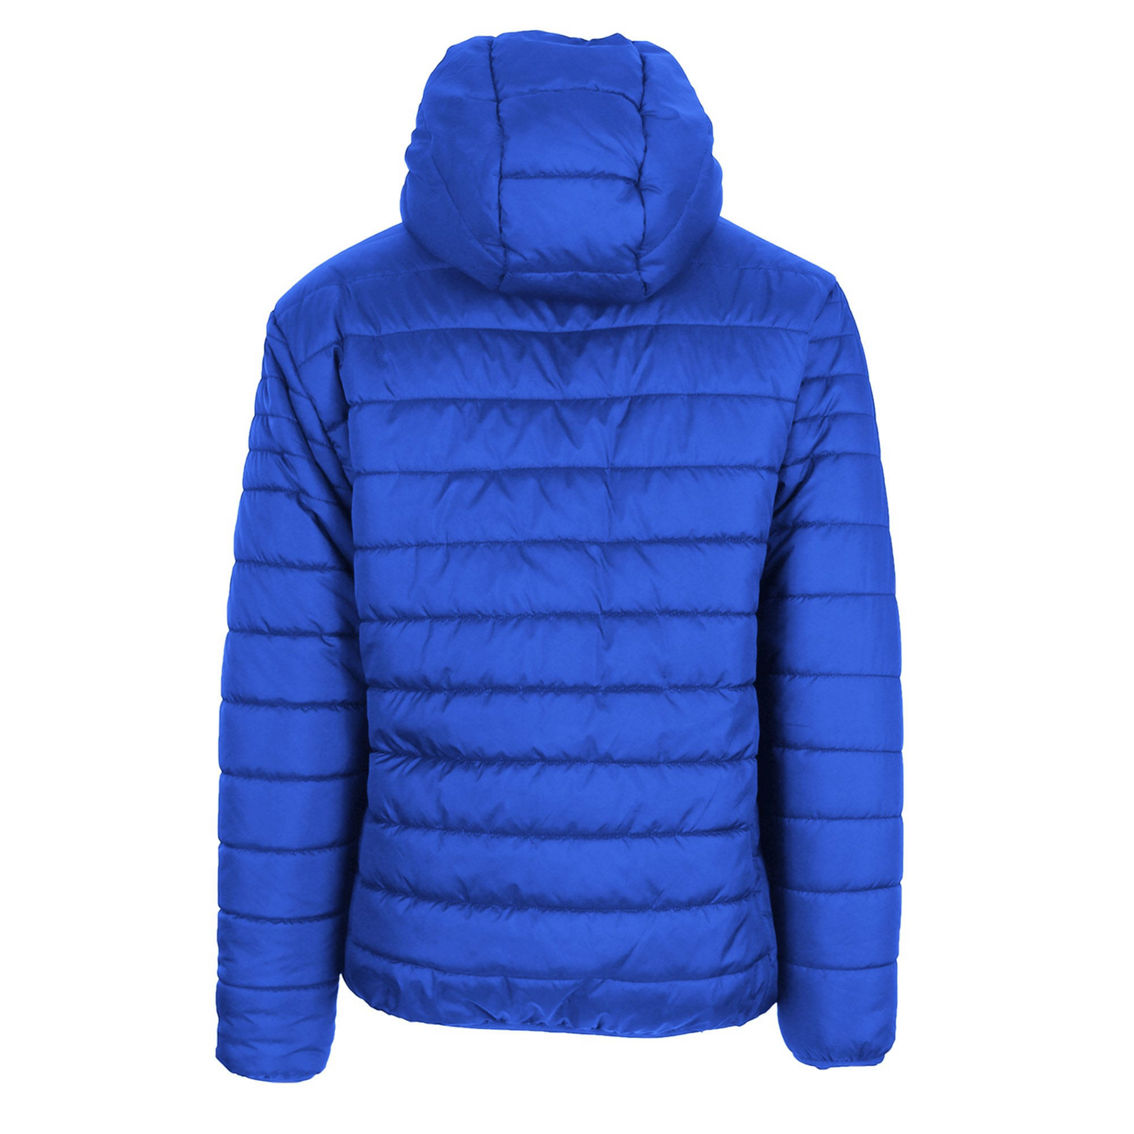 Spire By Galaxy Men's Sherpa Lined Hooded Puffer Jacket - Image 2 of 3